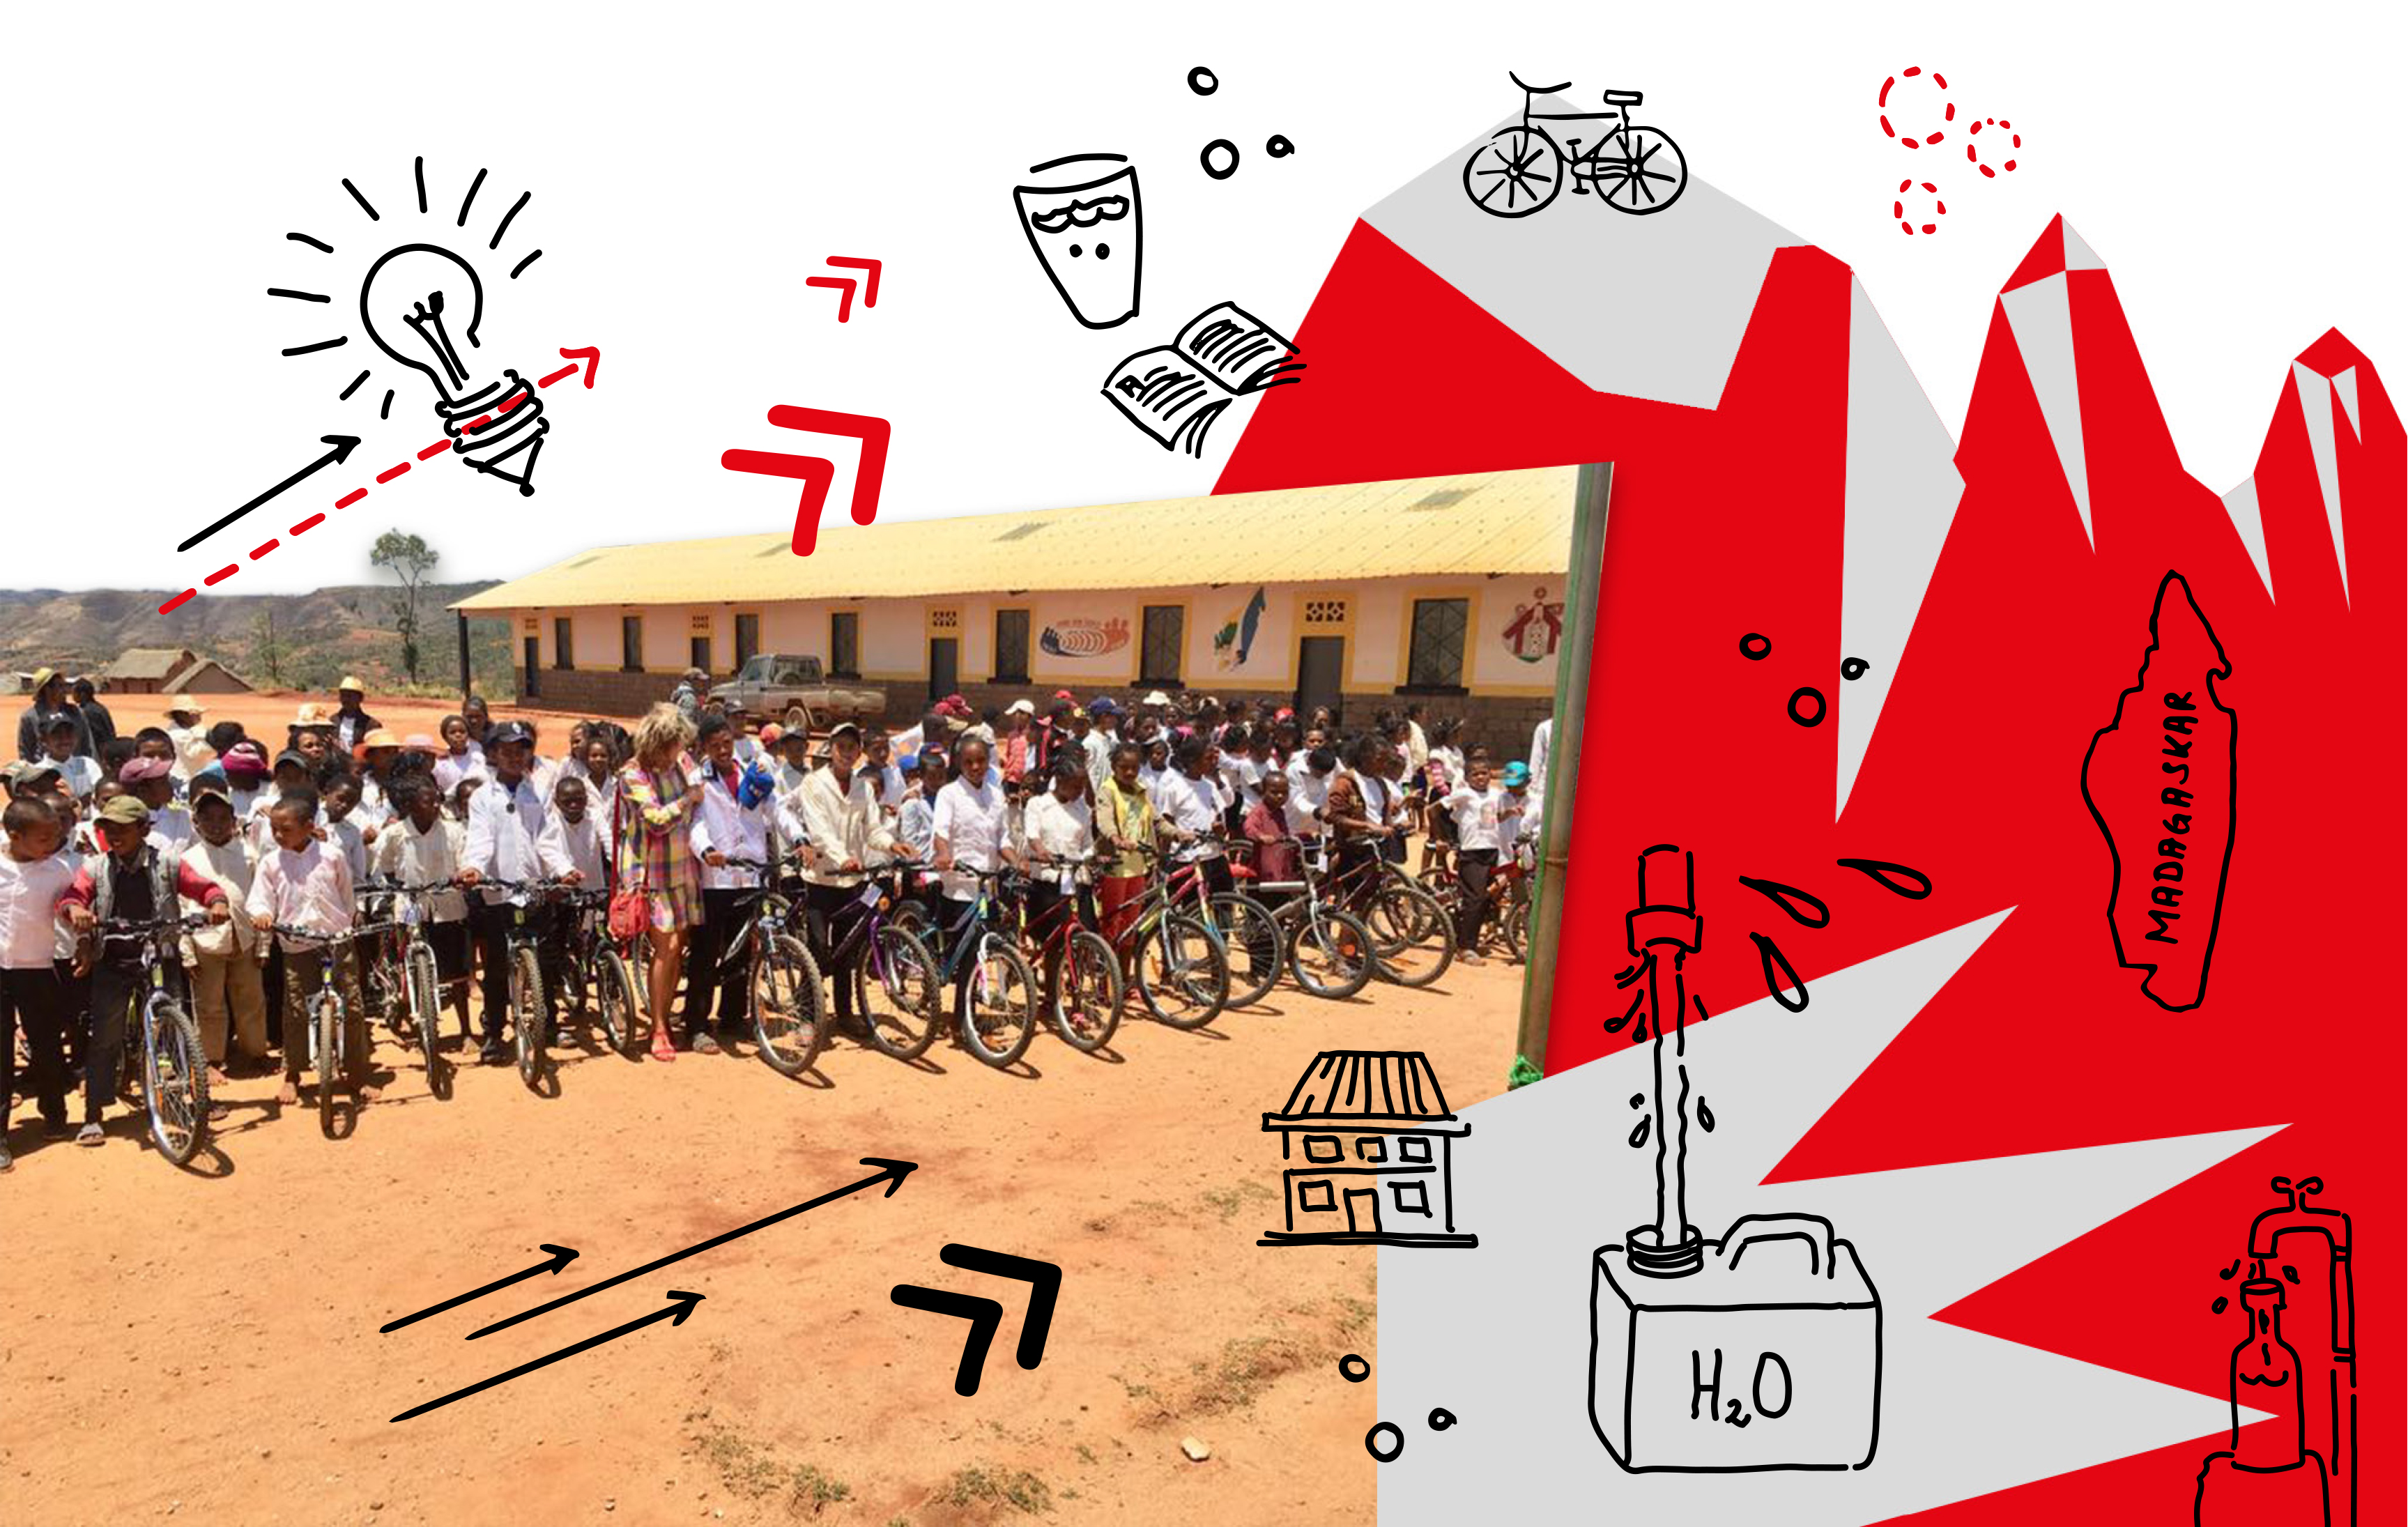 For these children in Madagascar, having a bicycle makes it easier to go to school 